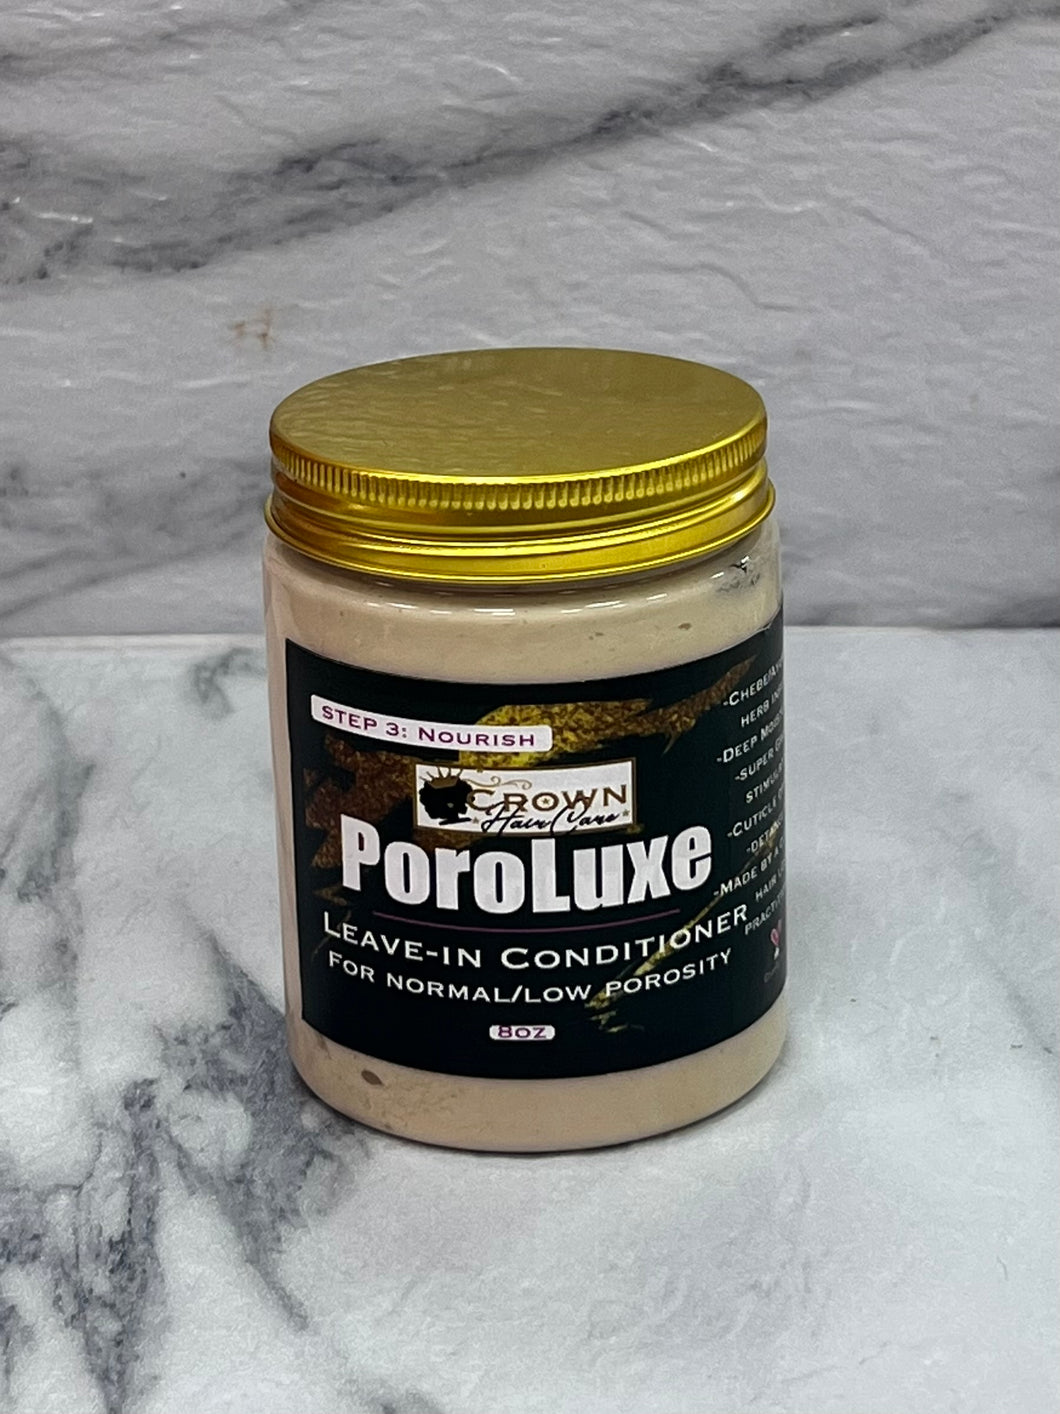 Poroluxe Leave In Conditioner-with chebe and Ayurvedic herbs